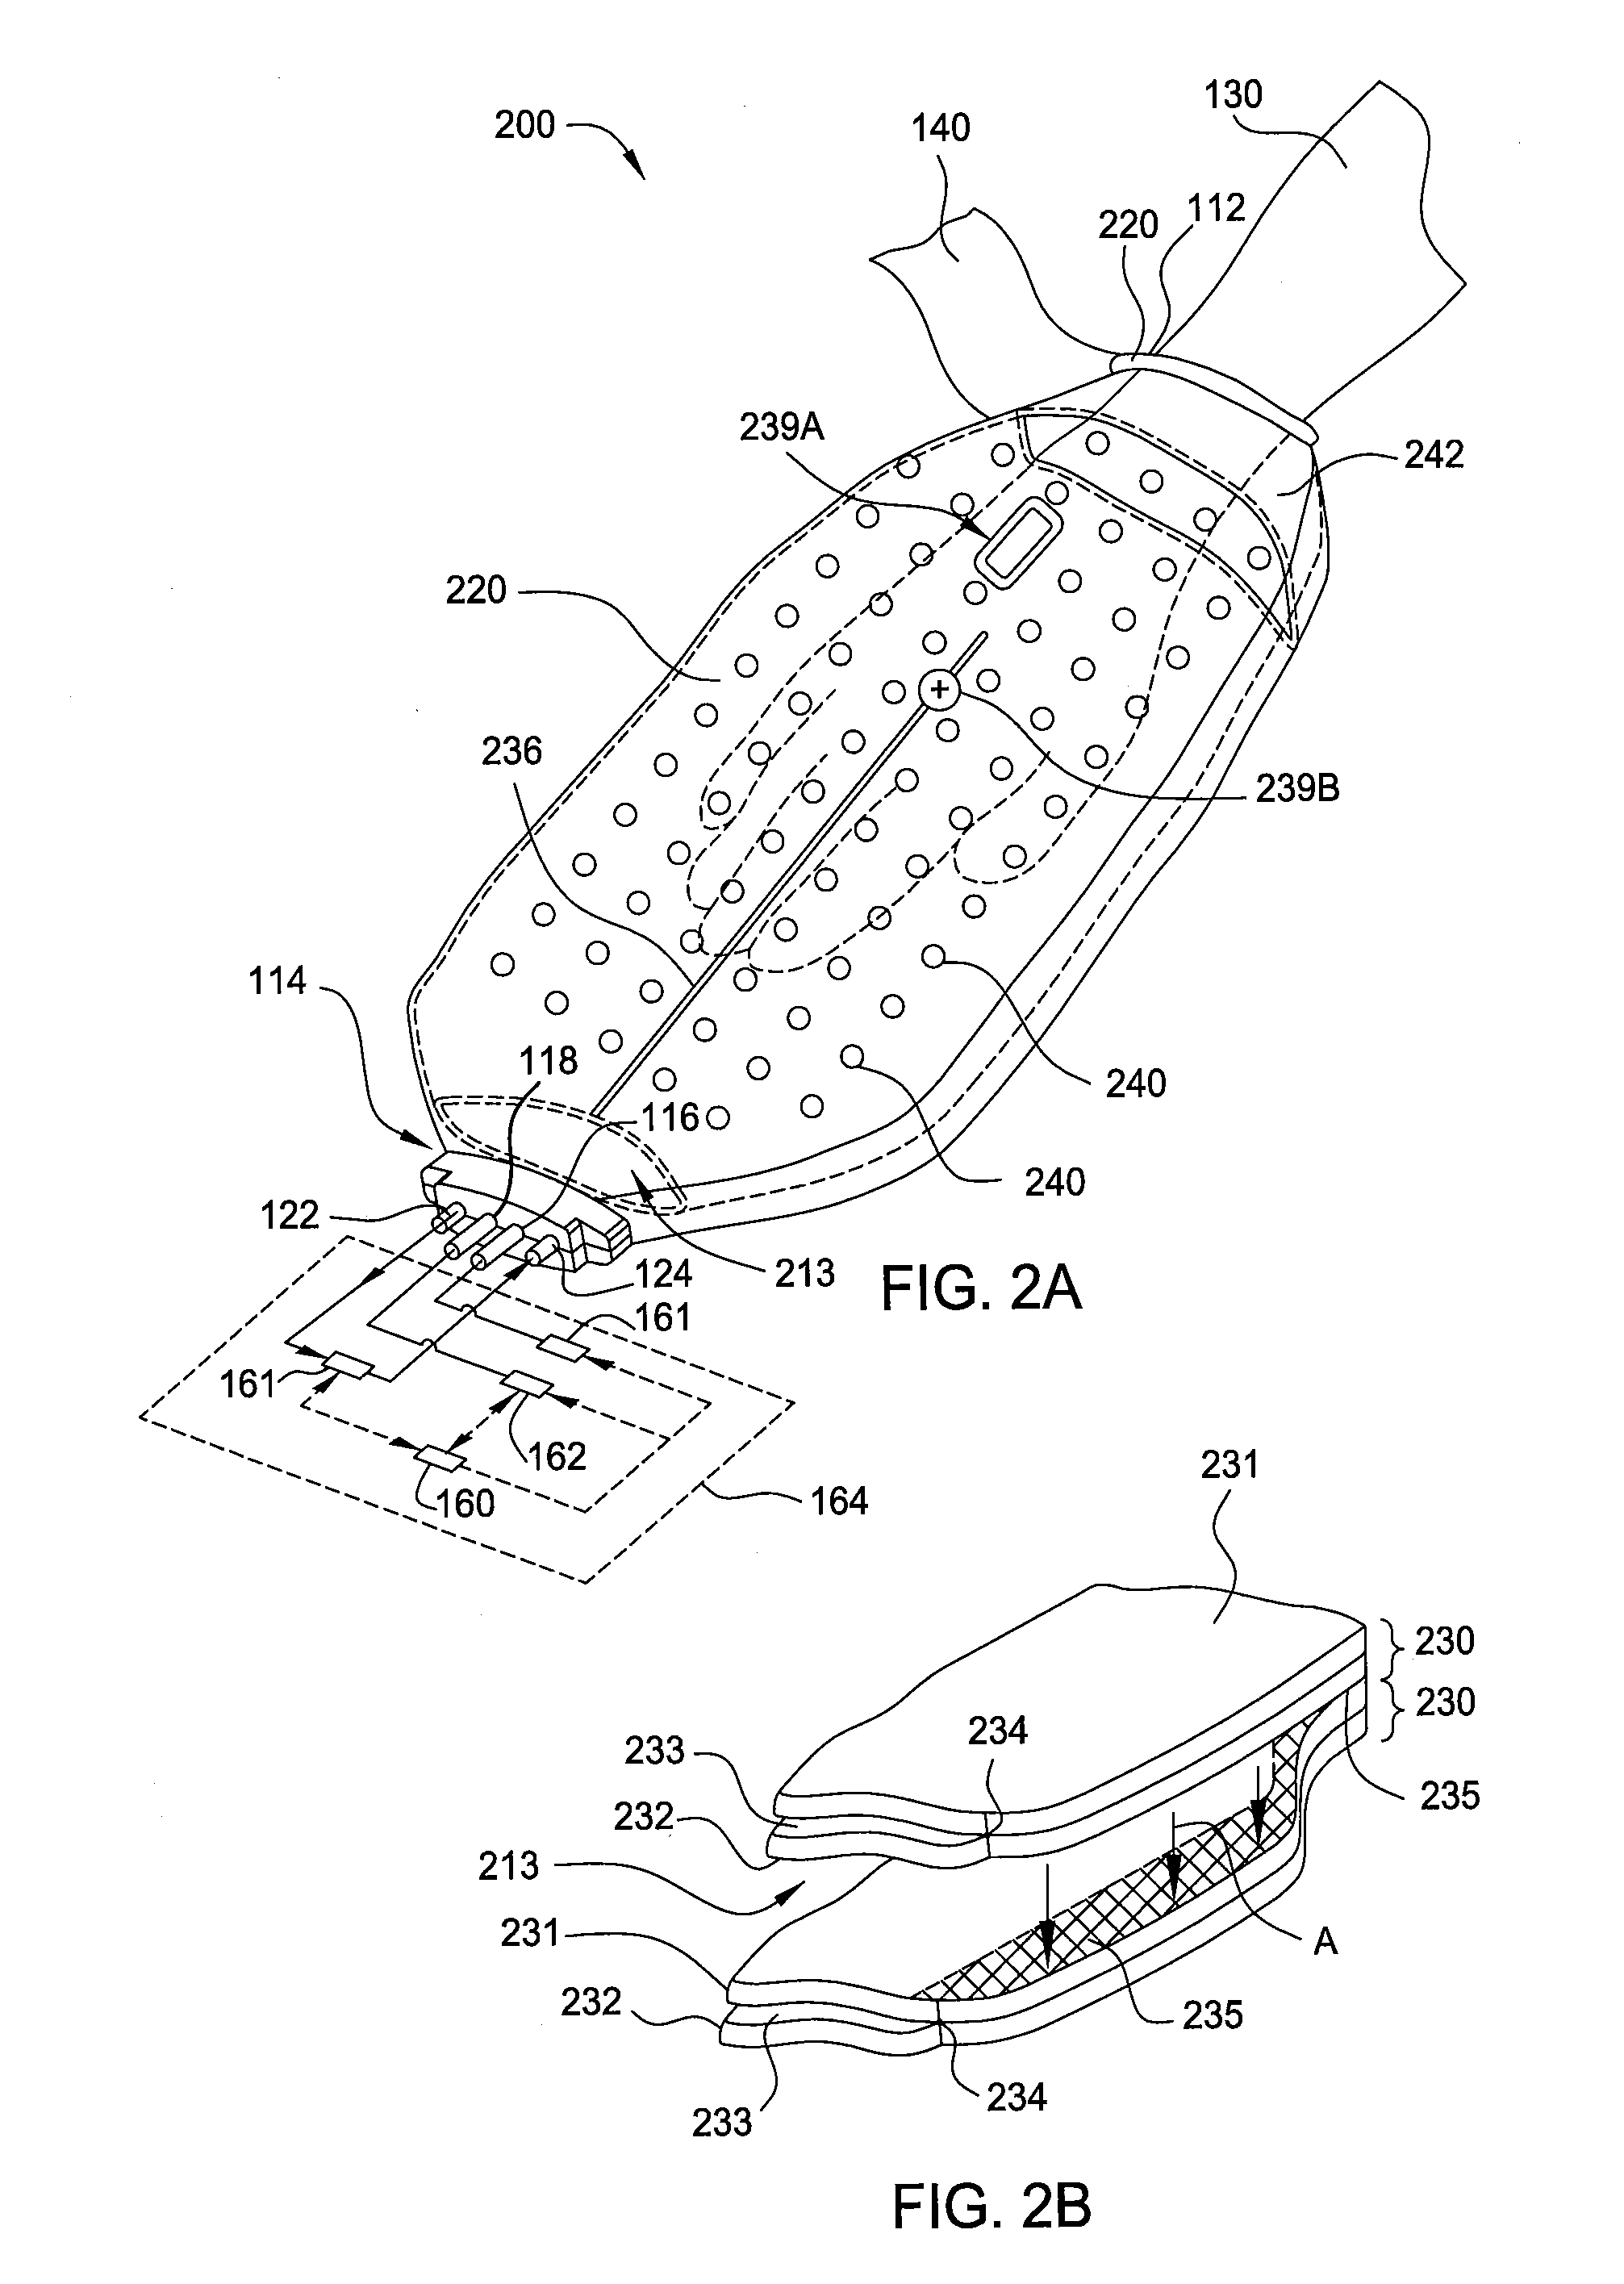 Methods and apparatus for enhancing vascular access in an appendage to enhance therapeutic and interventional procedures